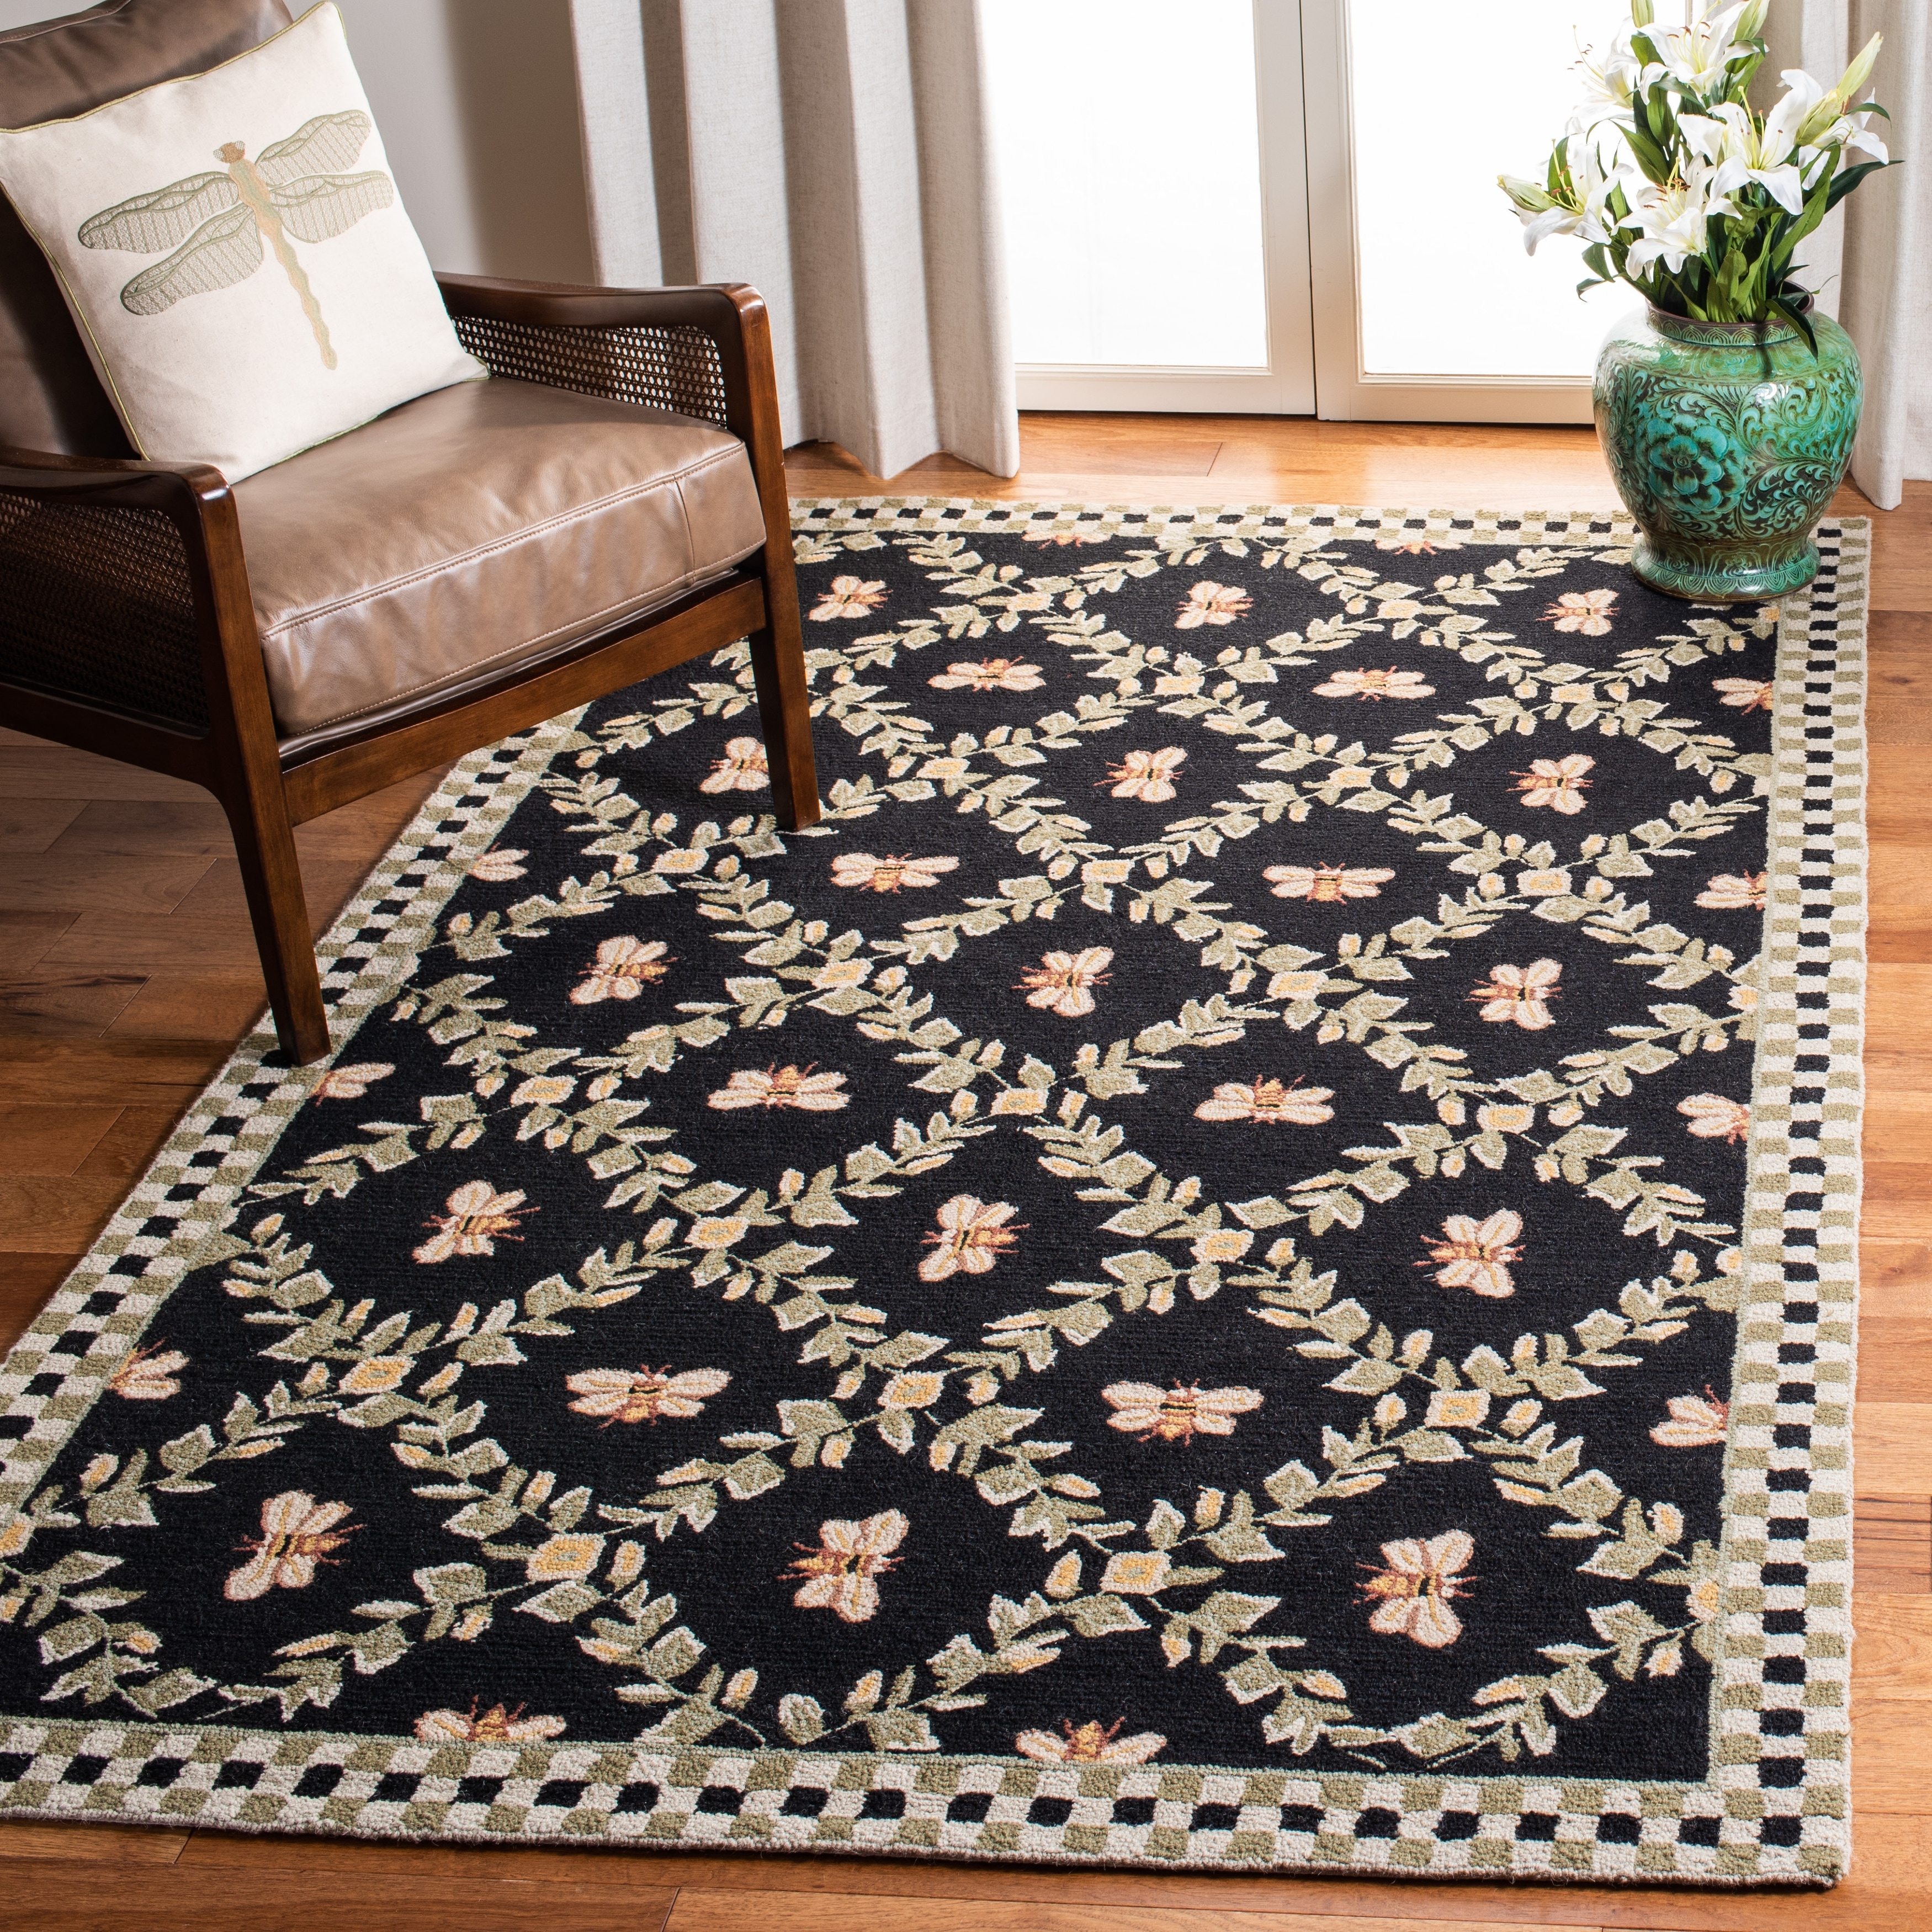 Safavieh Wilton Collection WIL335A Hand-Hooked Country Cottage Floral Wool Area Rug Taupe 5'6 x 8'6 Ivory 